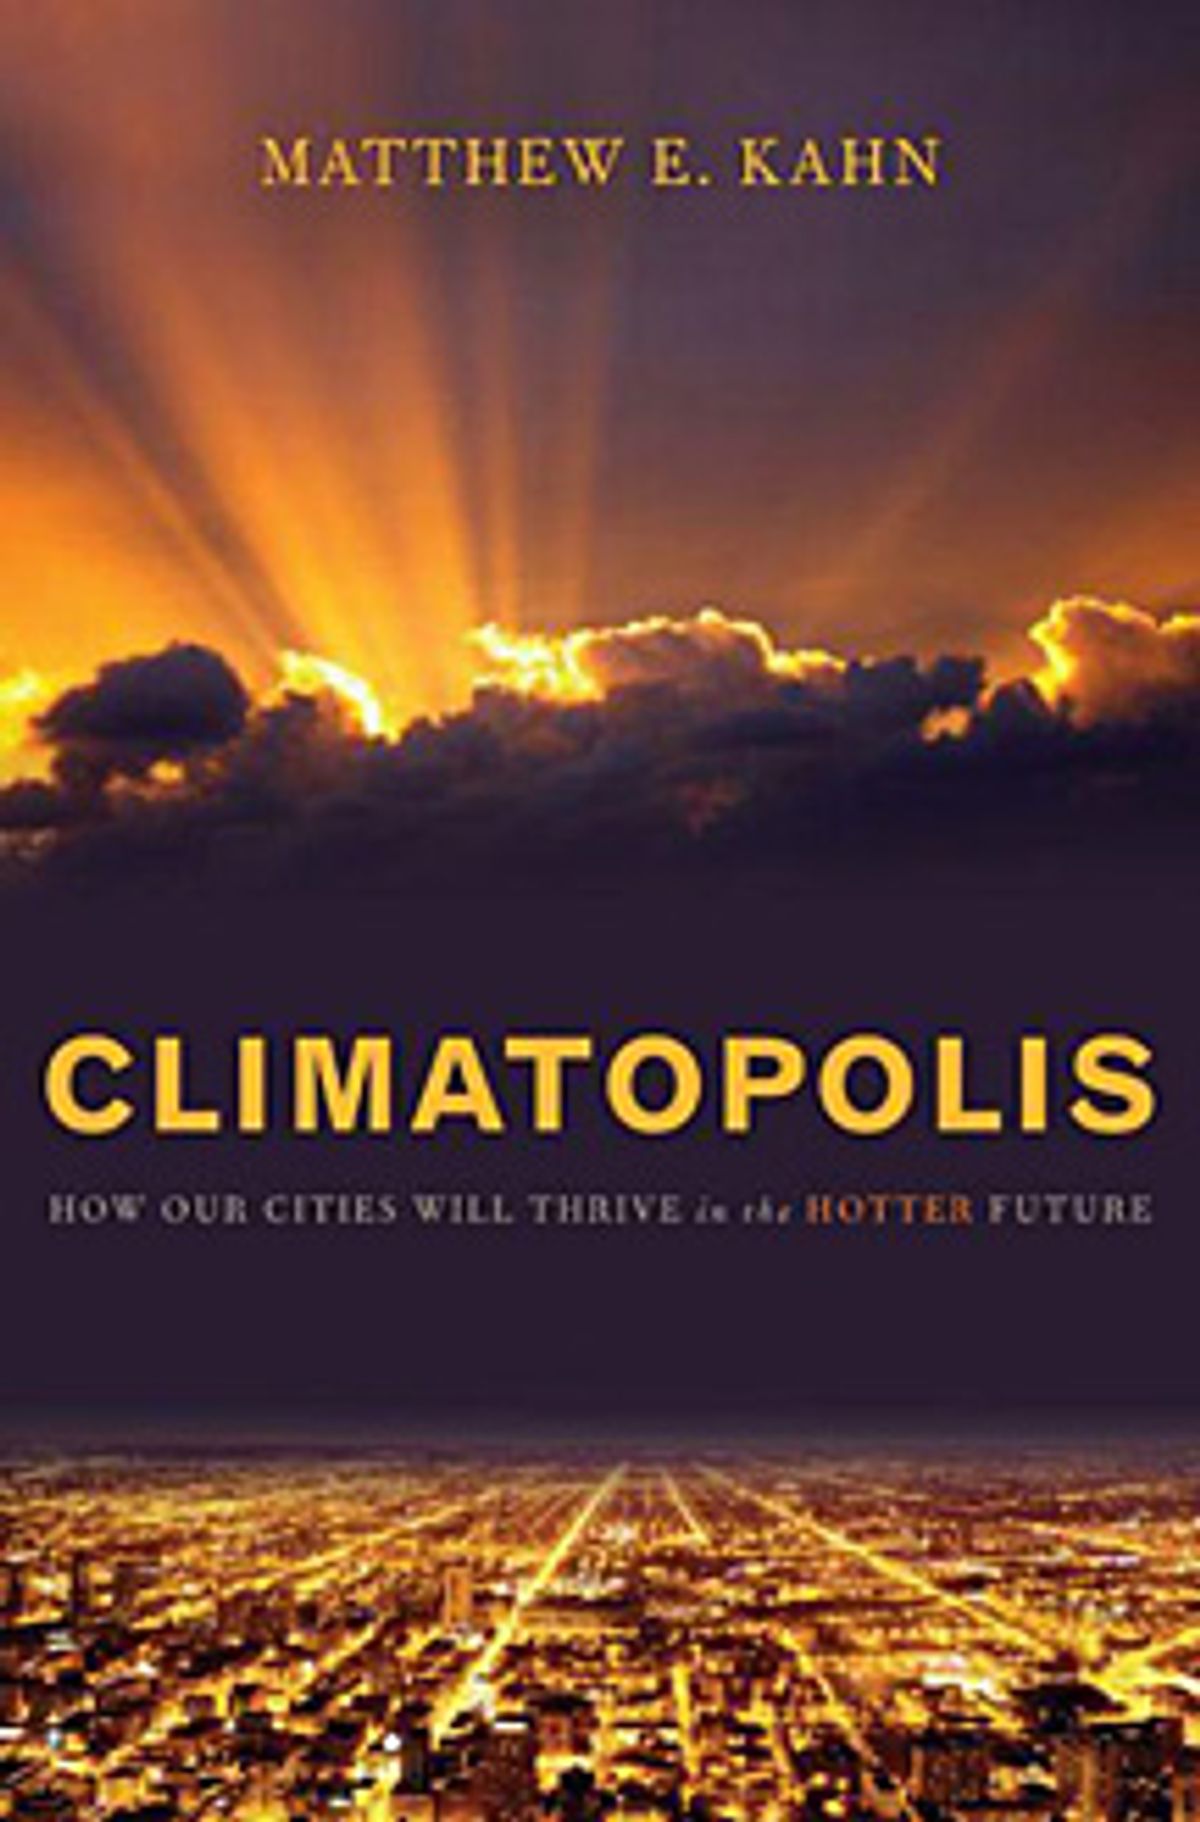 Book Review: Climatopolis: How Our Cities Will Thrive in the Hotter Future